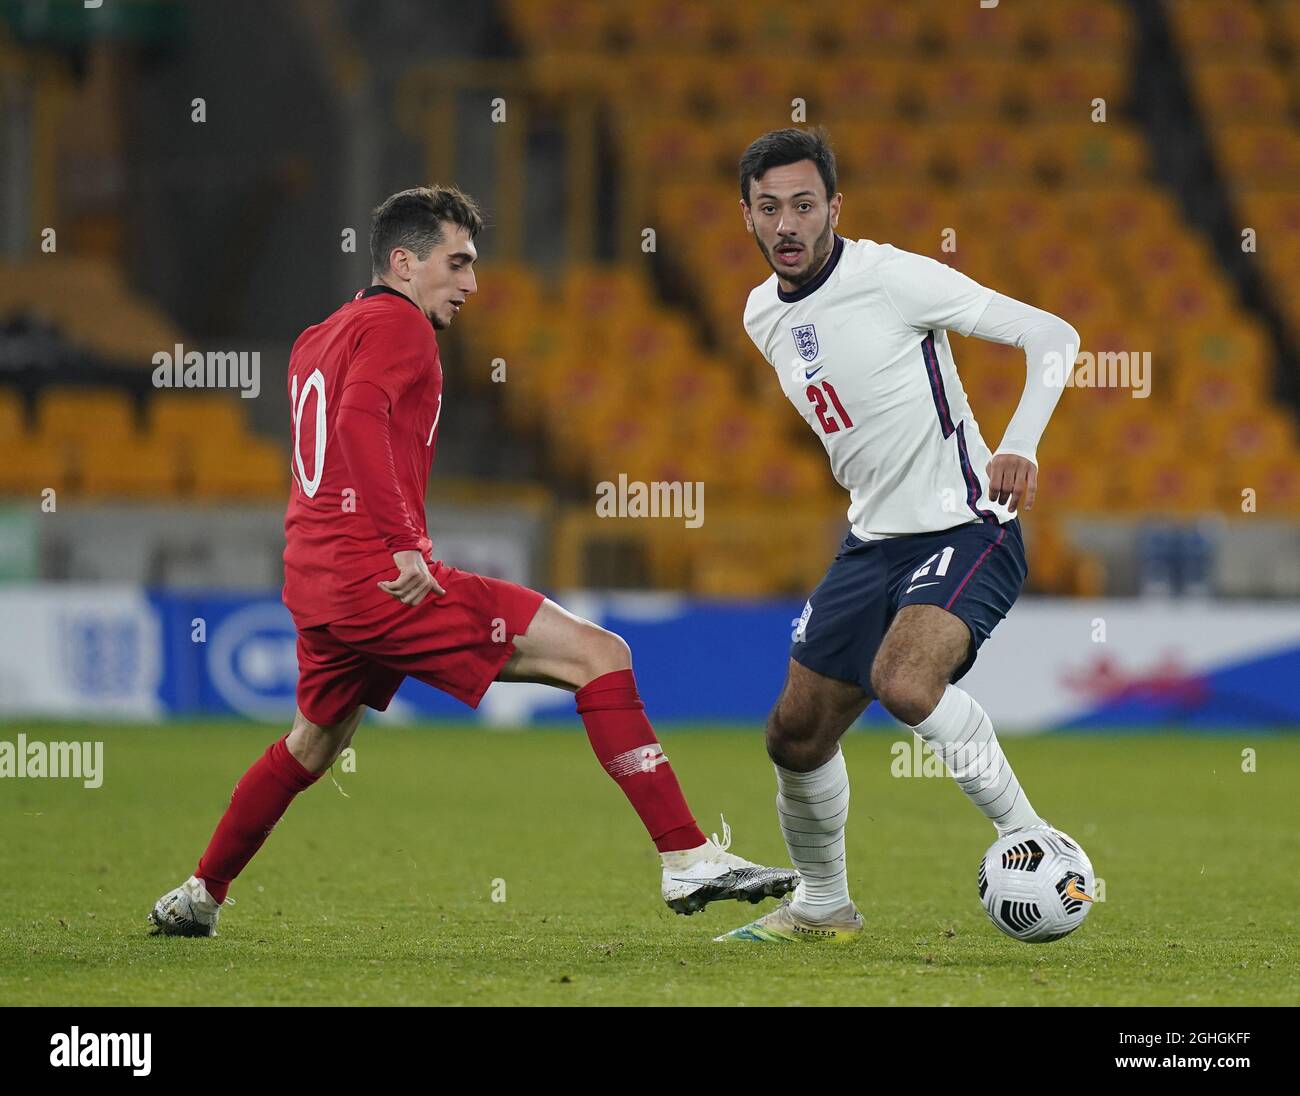 Dwight Marshall of England and Ravil Tagir of Turkey during the UEFA Euro U21 Qualifying match at Molineux, Wolverhampton. Picture date: 13th October 2020. Picture credit should read: Andrew Yates/Sportimage via PA Images Stock Photo